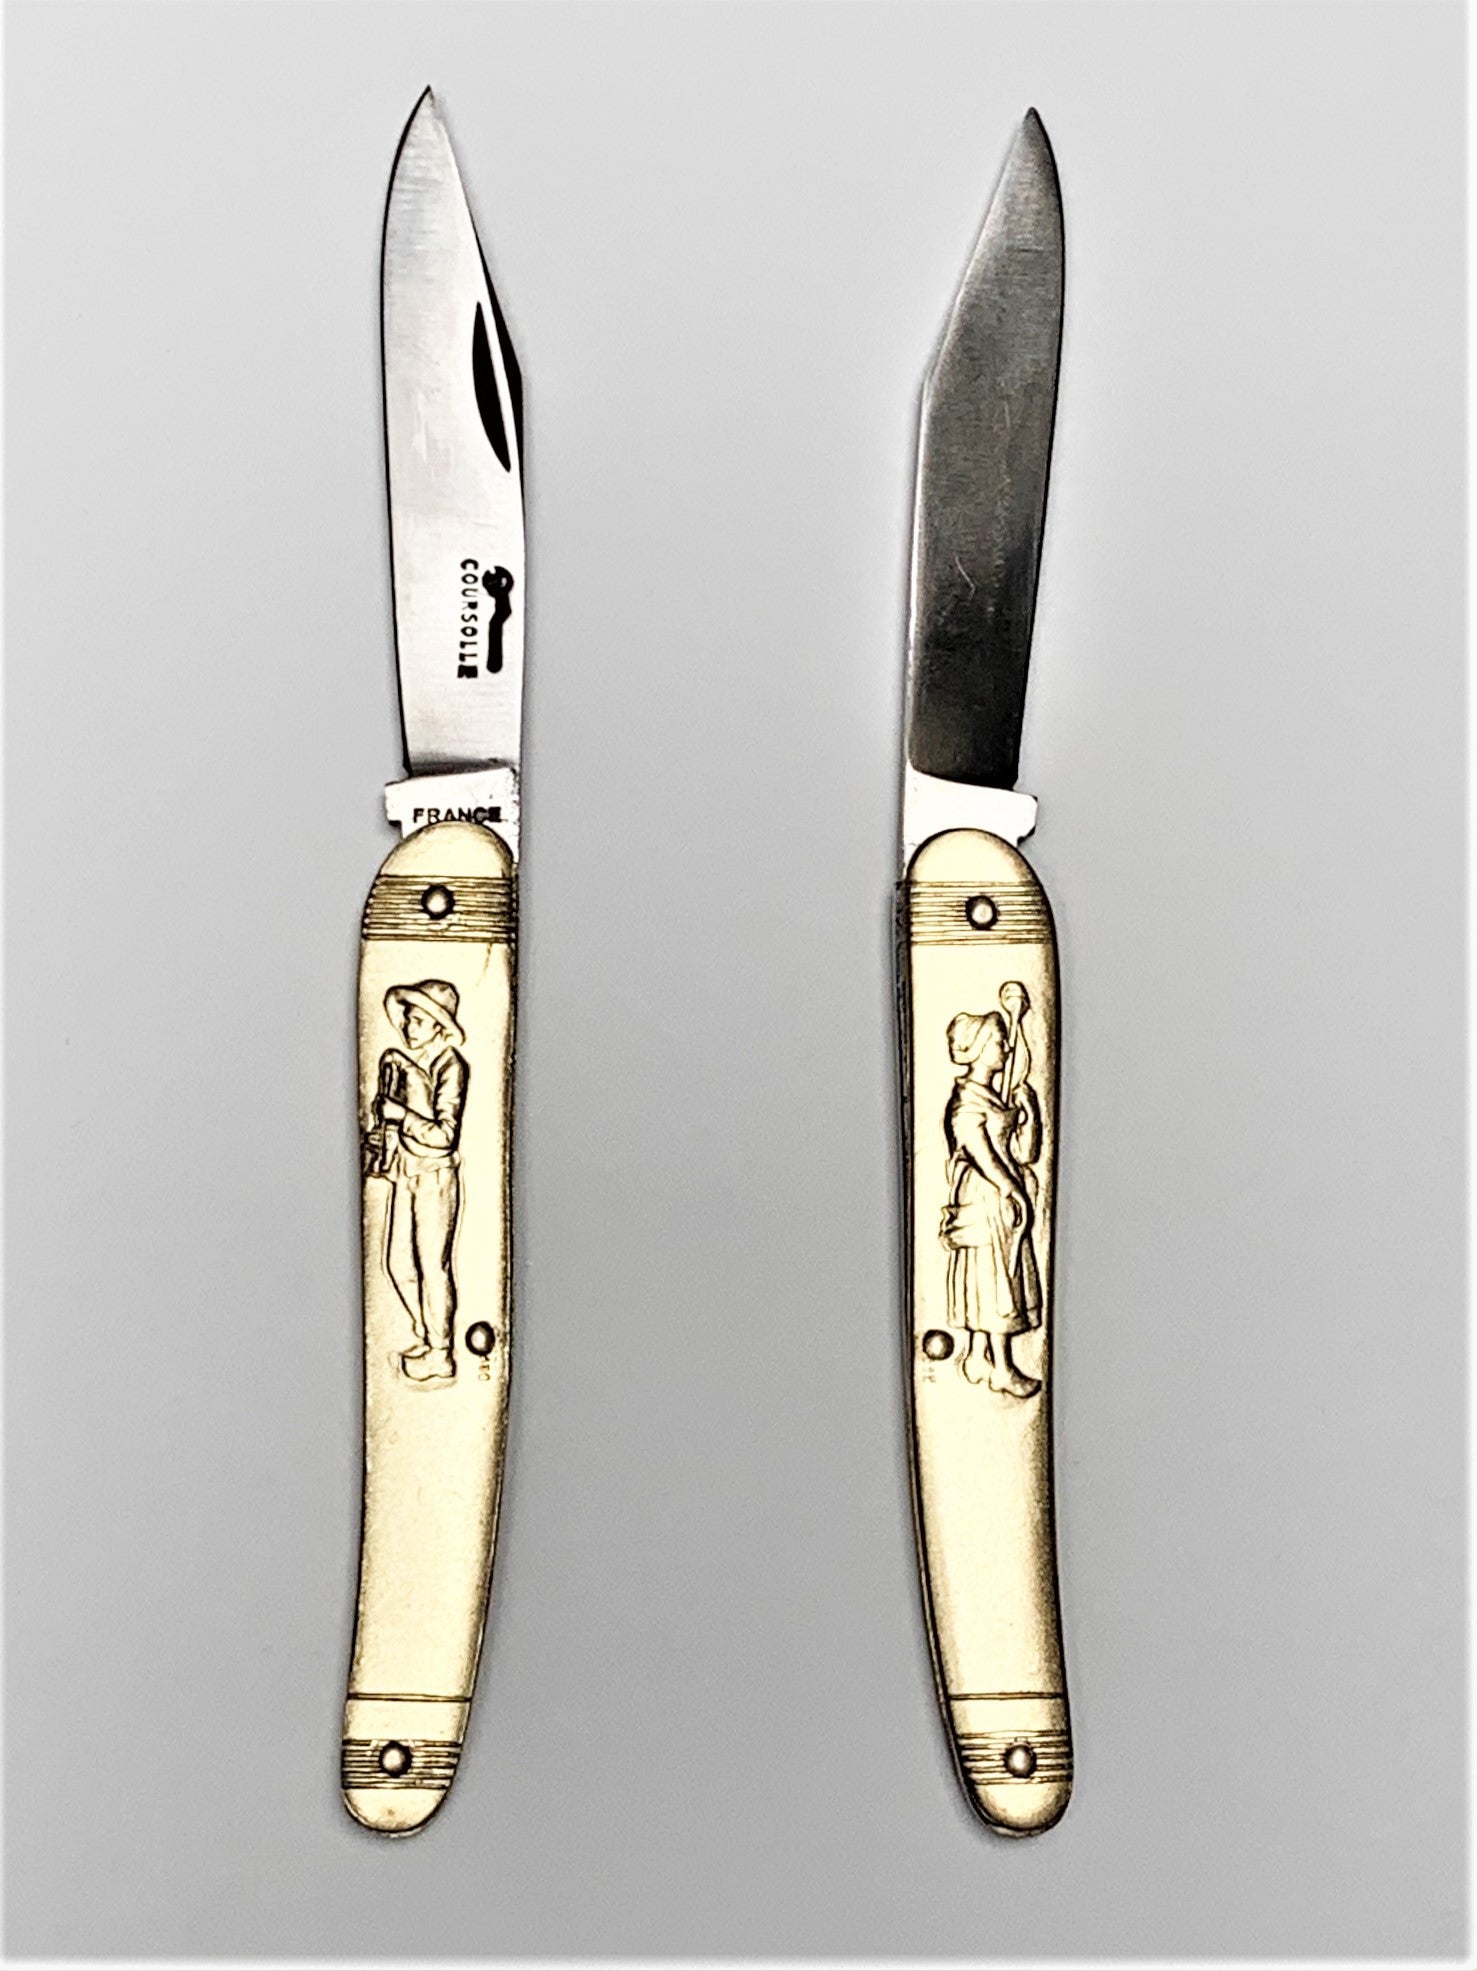 Couperier Coursolle Brass 80mm Single Blade Pocket Knife - Woman + Young Boy Wearing Hat in Wooden Box - Pocket Knives - Couperier Coursolle - Brand_Couperier Coursolle - Kitchen_Dinnerware - Kitchen_Kitchenware - Knife Sets - Laguiole - Spring Collection - 7800LAI220BWB_2